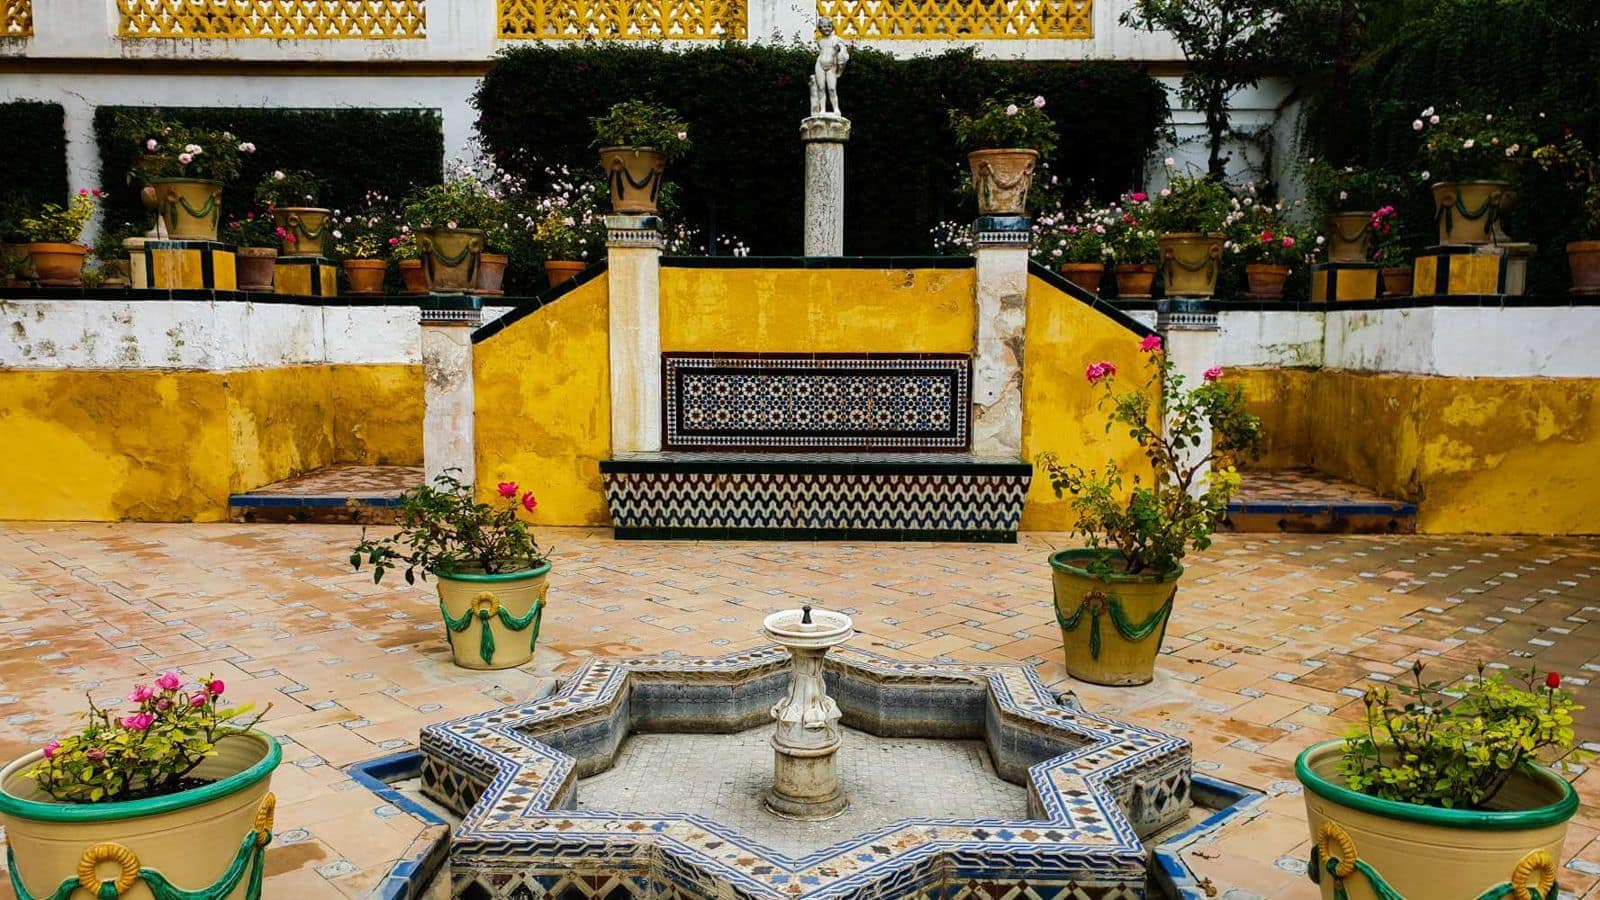 Travel to Seville's hidden charms with this guide